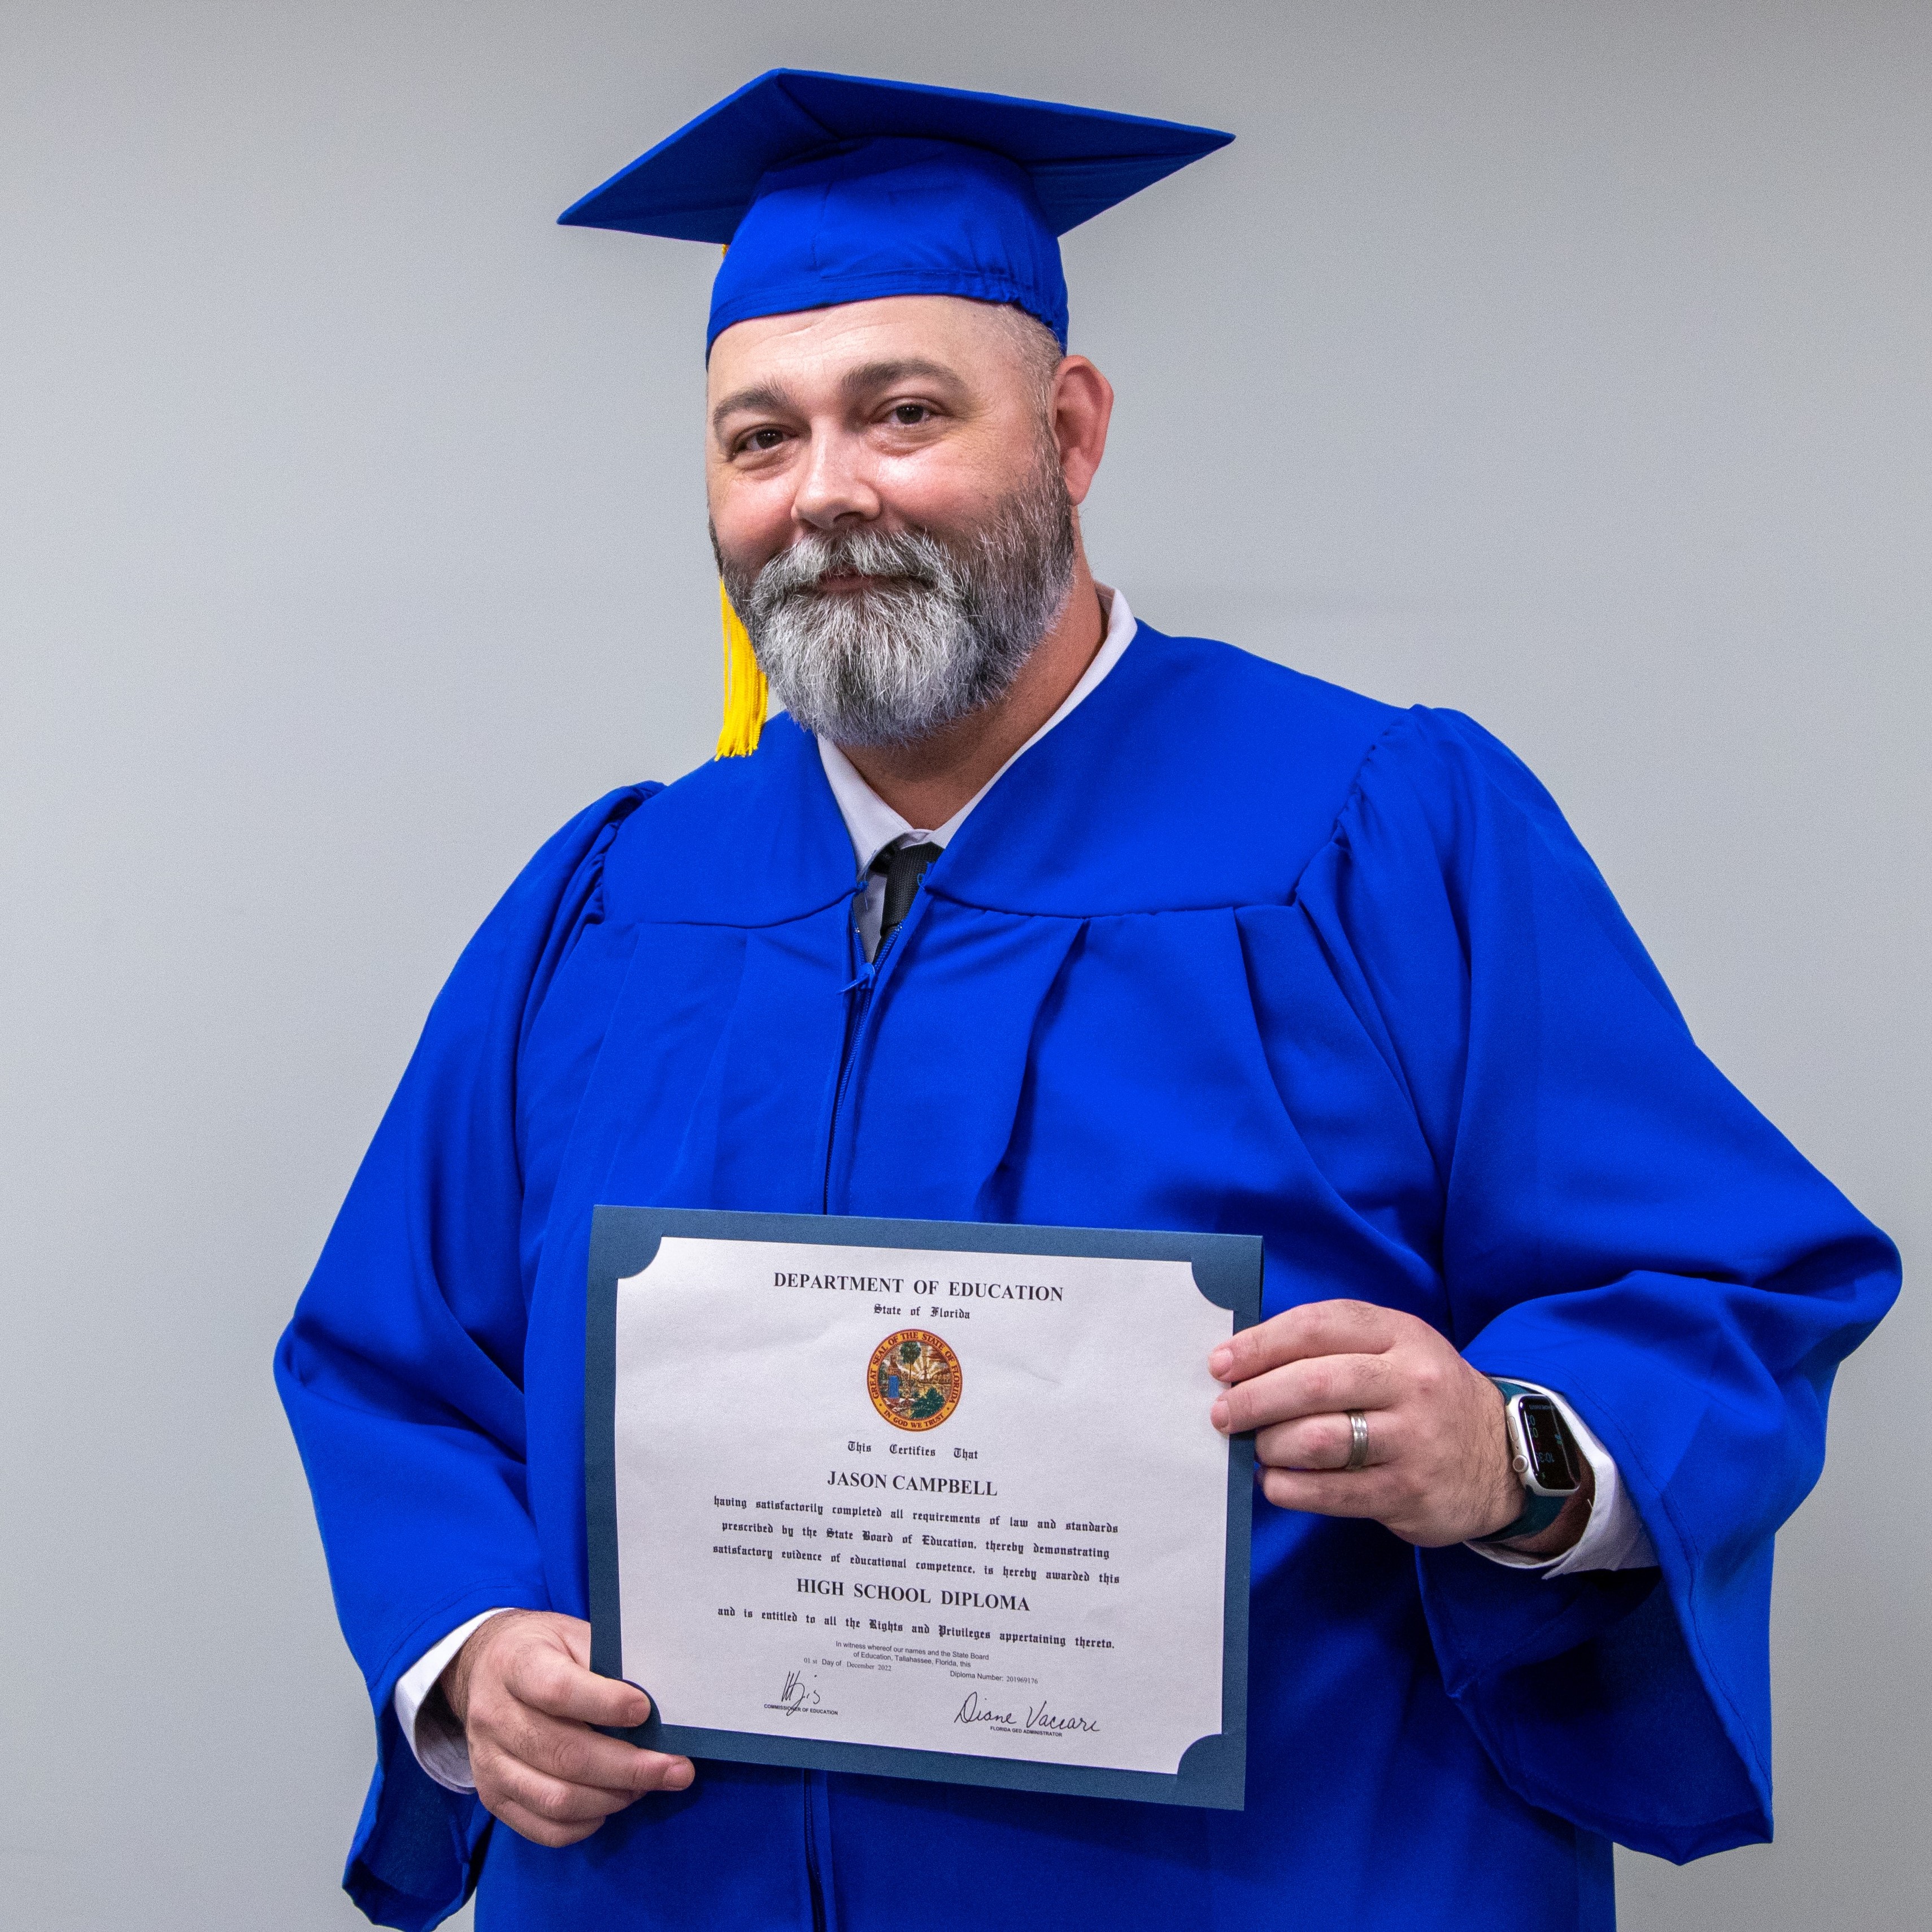 Jason Campbell in a cap and gown, holding his diploma